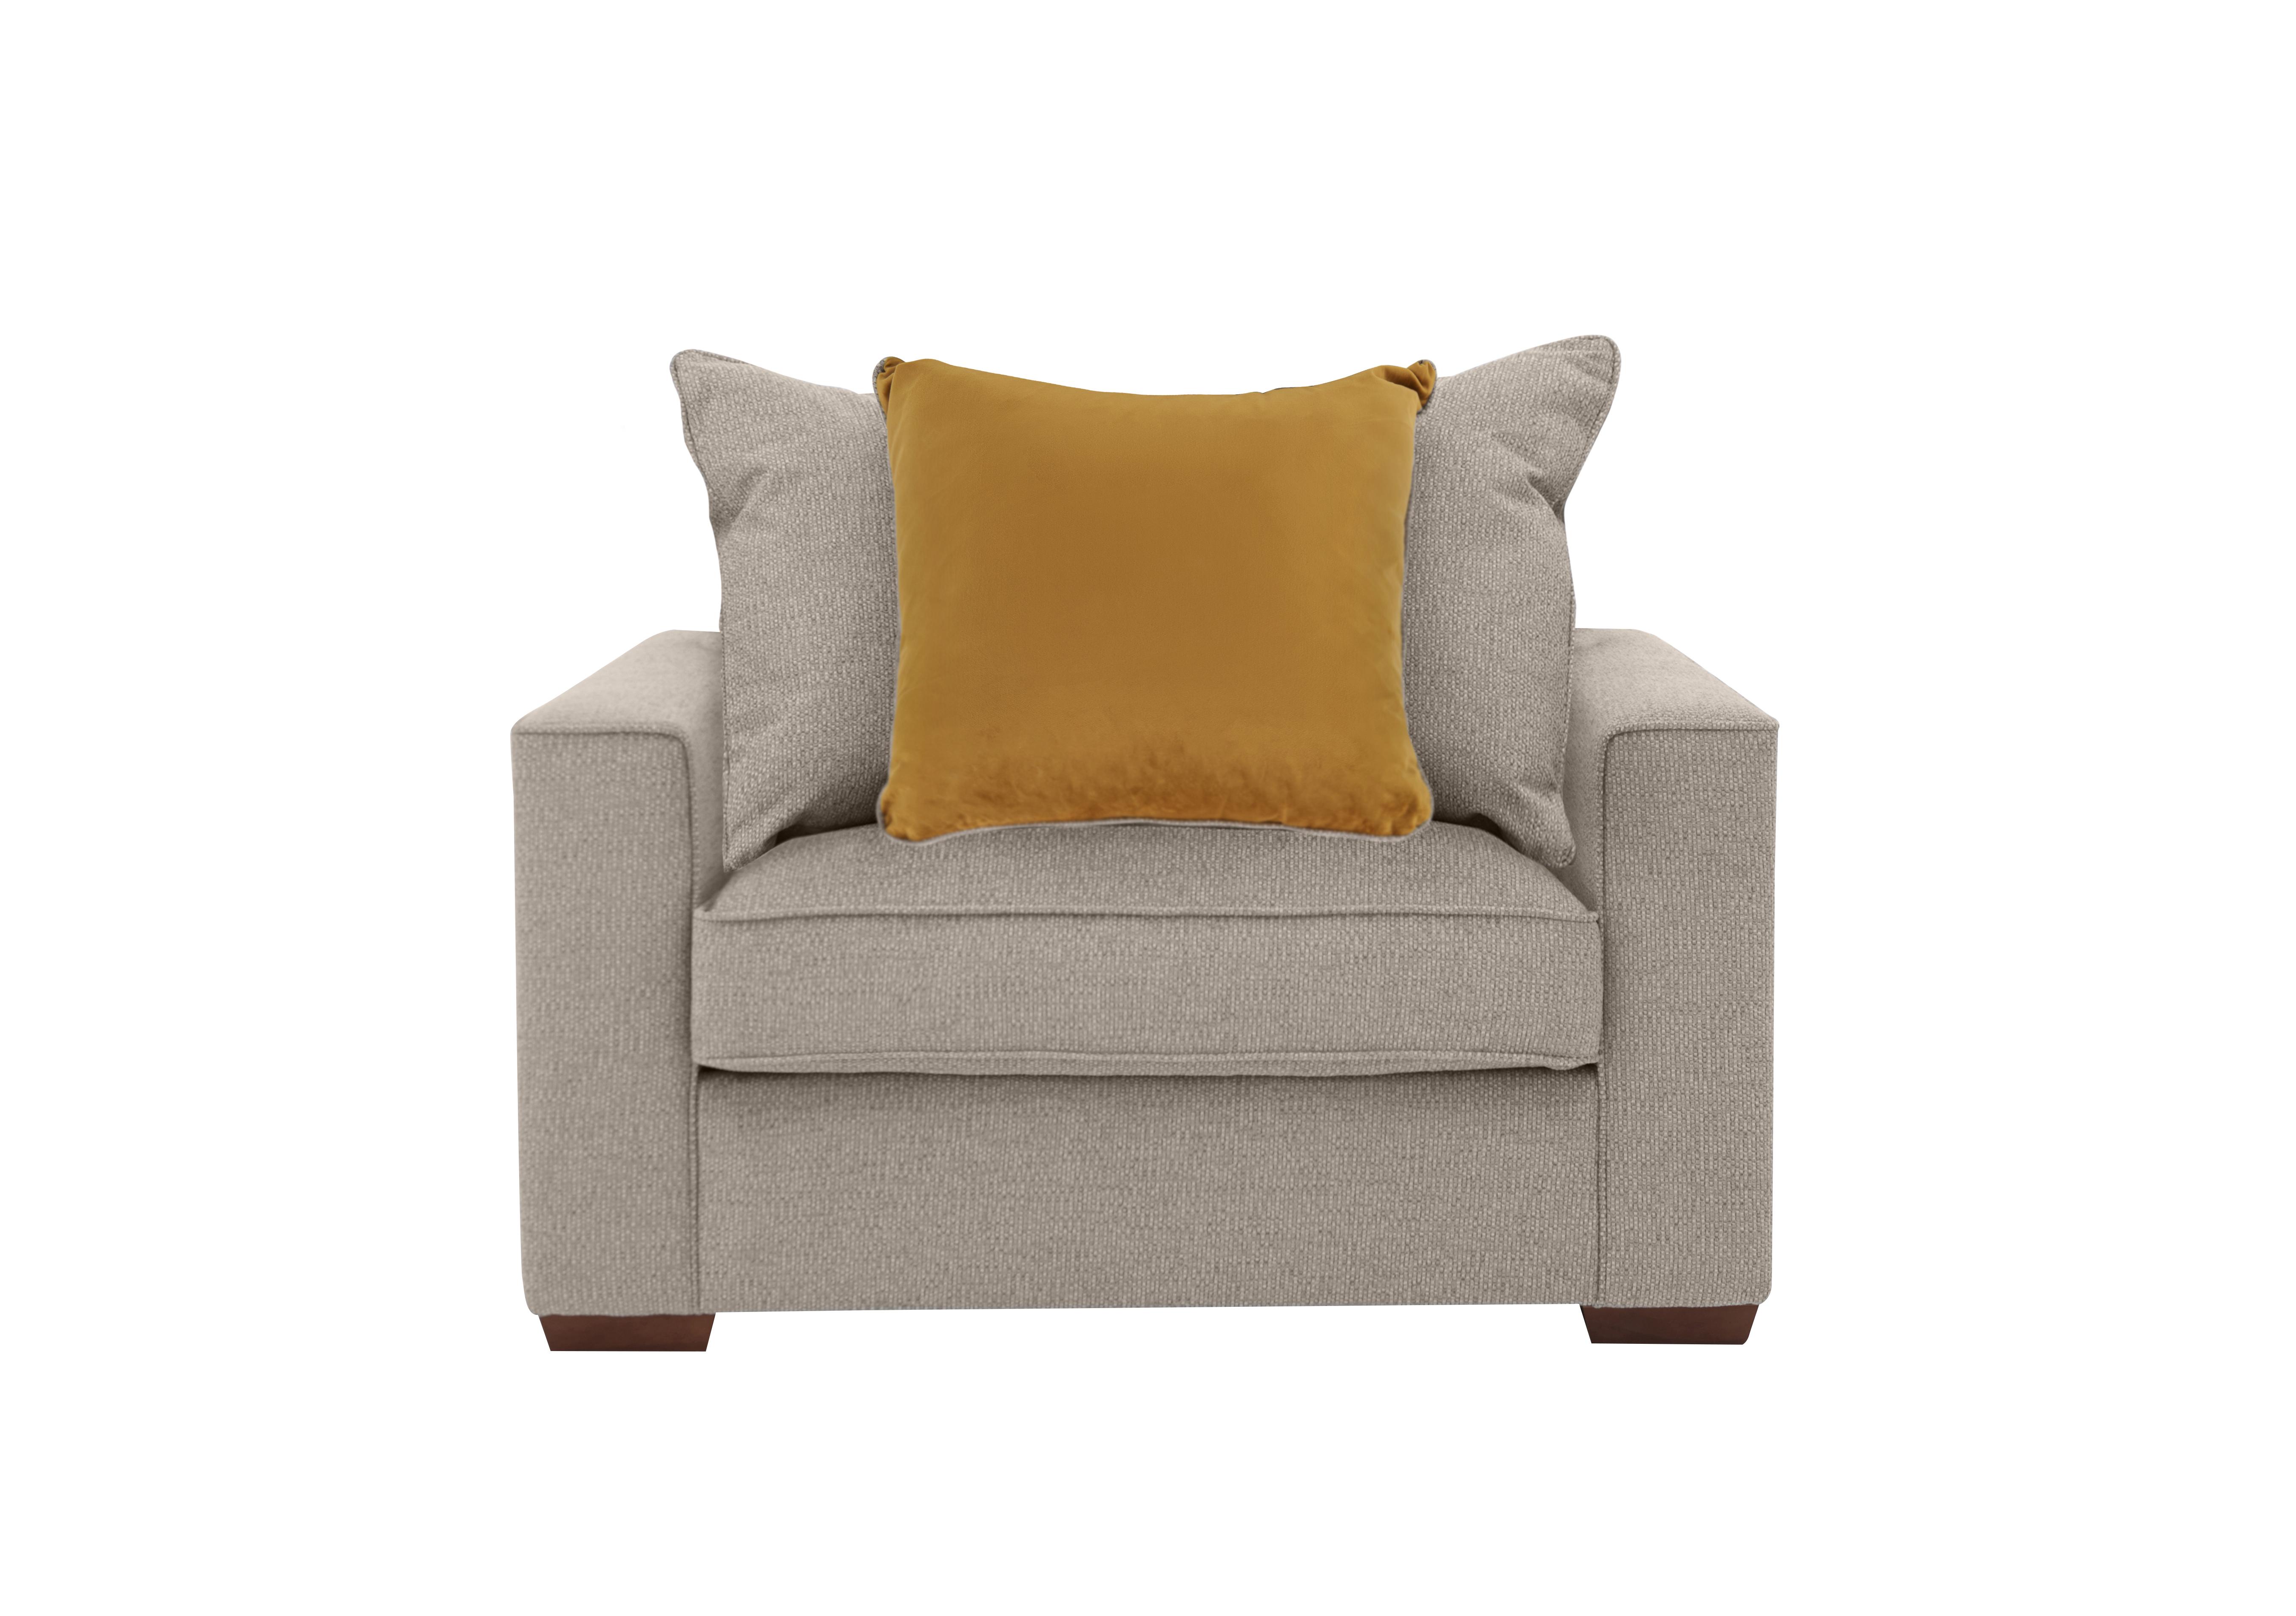 Cory Fabric Scatter Back Chair Bed in Dallas Natural Mustard Pack on Furniture Village